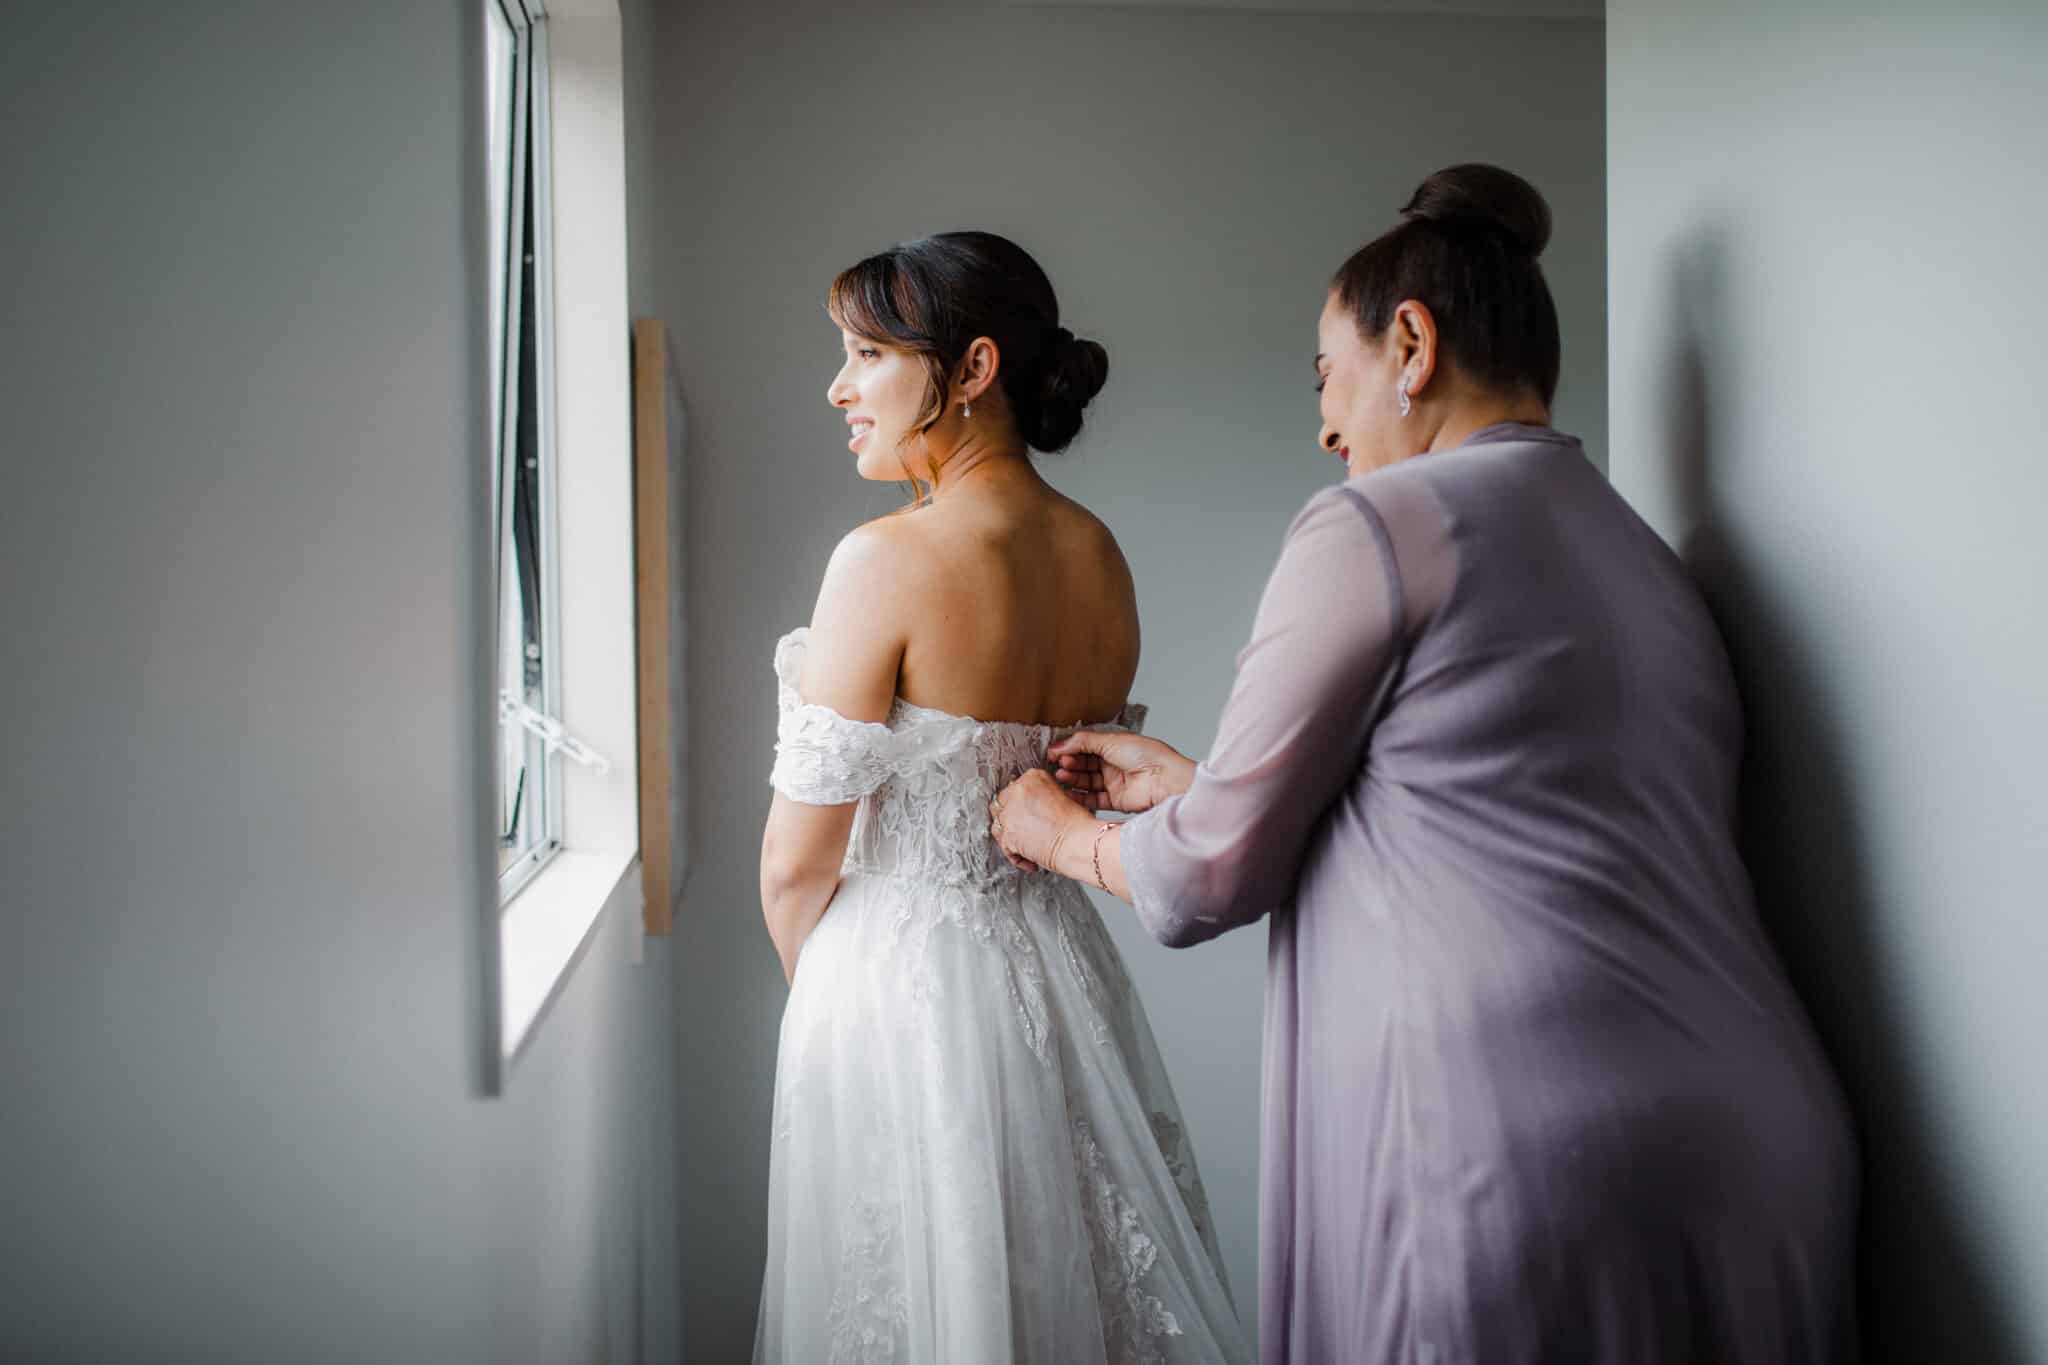 mother of the bride helping with wedding dress